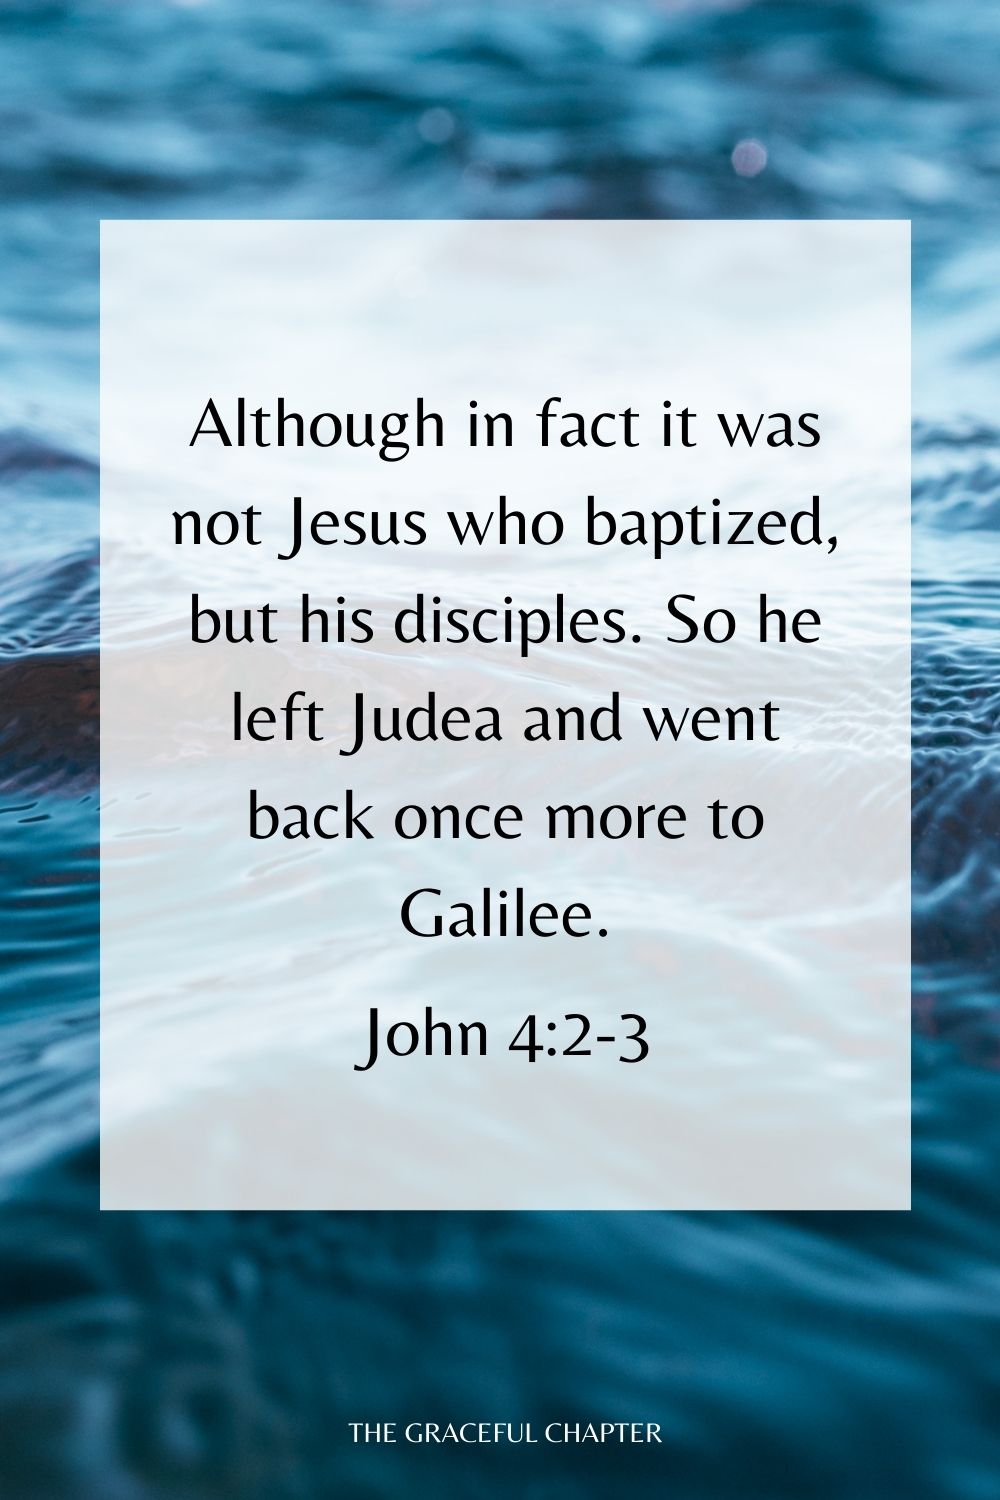 Although in fact it was not Jesus who baptized, but his disciples. So he left Judea and went back once more to Galilee. John 4:2-3